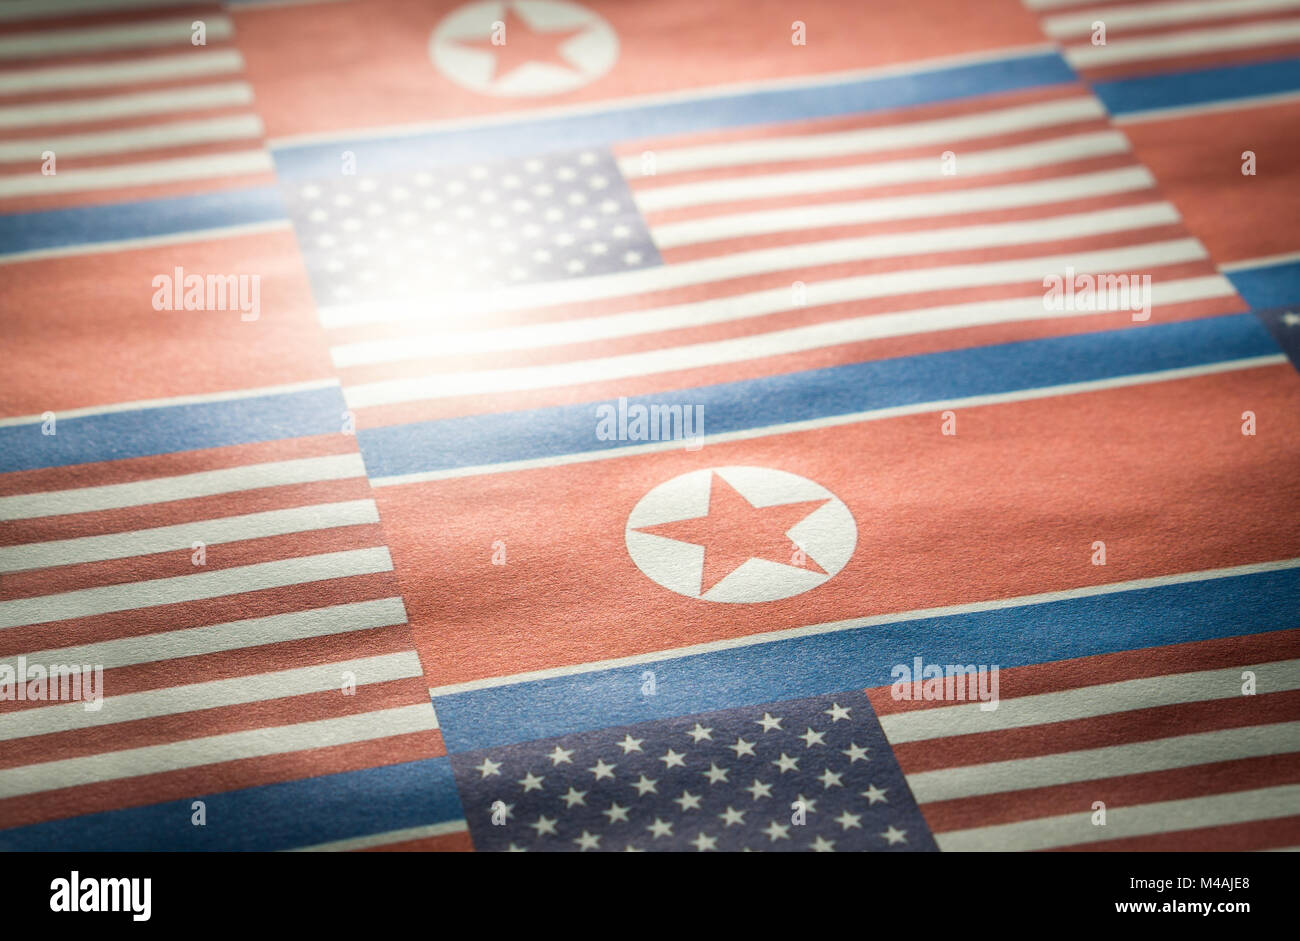 The flag of North Korea and United States of America (USA) on a wrinkled rough paper texture. Stock Photo